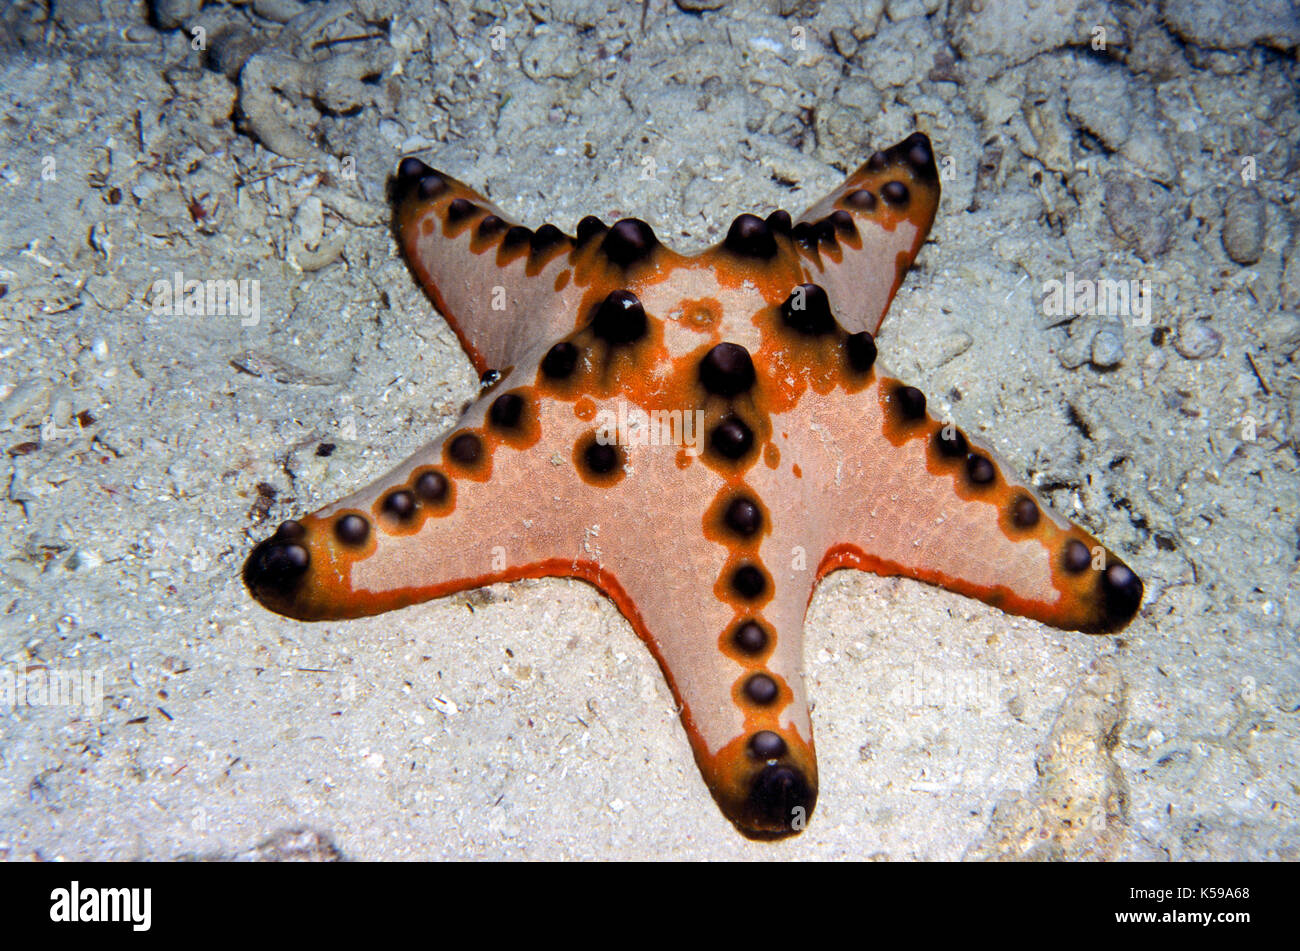 Meet the Chocolate Chip Starfish and Its Unusual Relatives